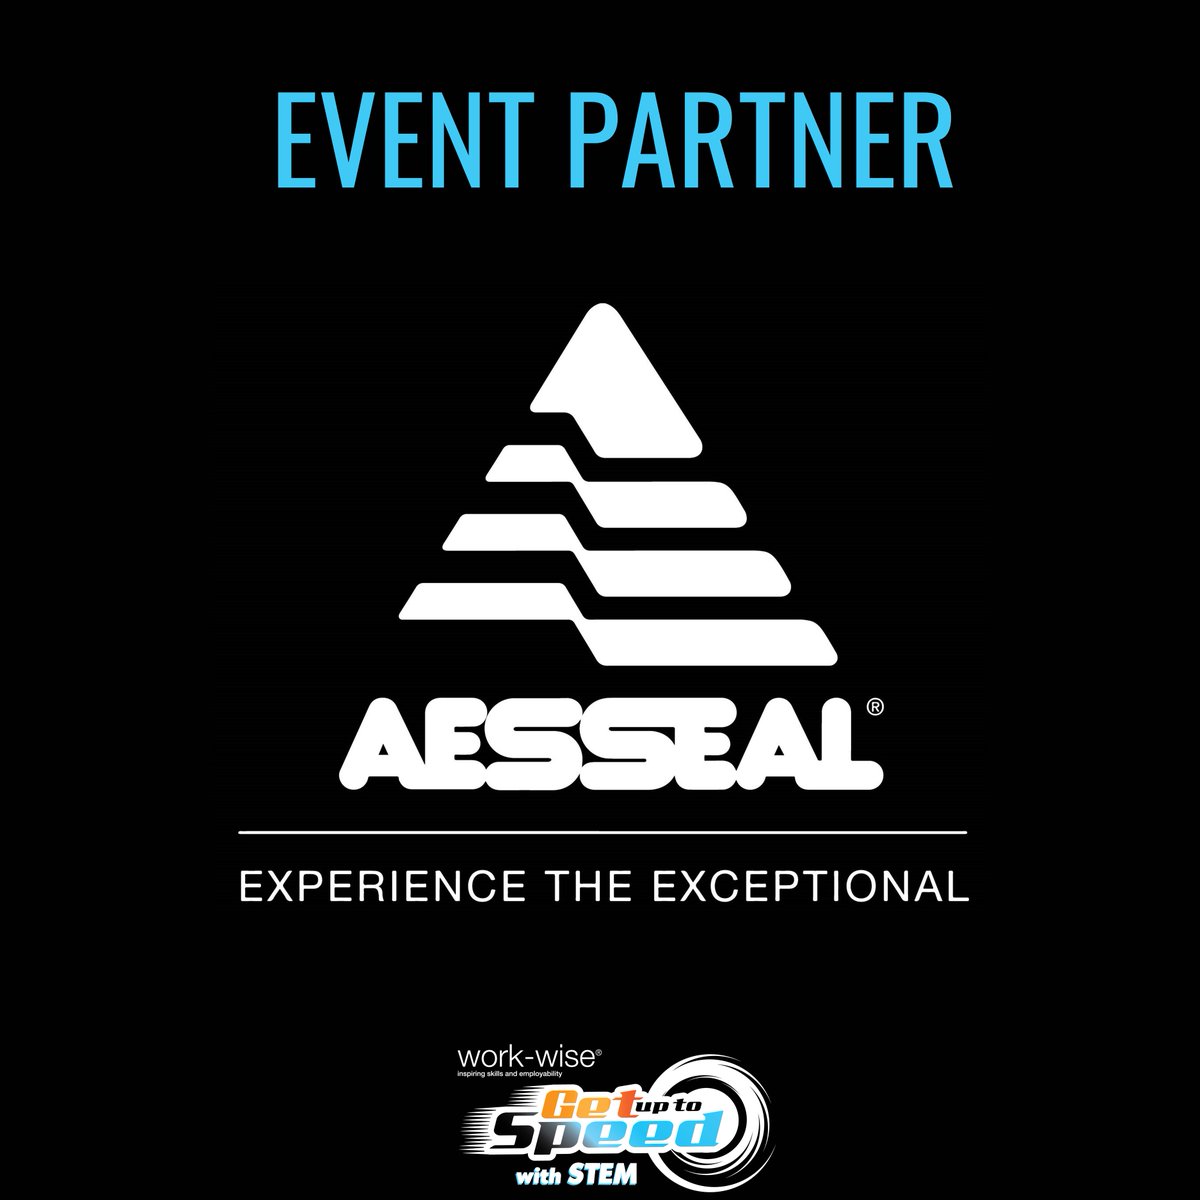 We are thrilled to announce @AESSEALplc will be our Event Partner for Get up to Speed with STEM: The Virtual Experience!

Find out more: ow.ly/Ha6U50DkyAS

#eventpartner #thevirtualexperience #GUTS2021 #virtualevent #STEM #youngpeople #eventplanning #onlineevent